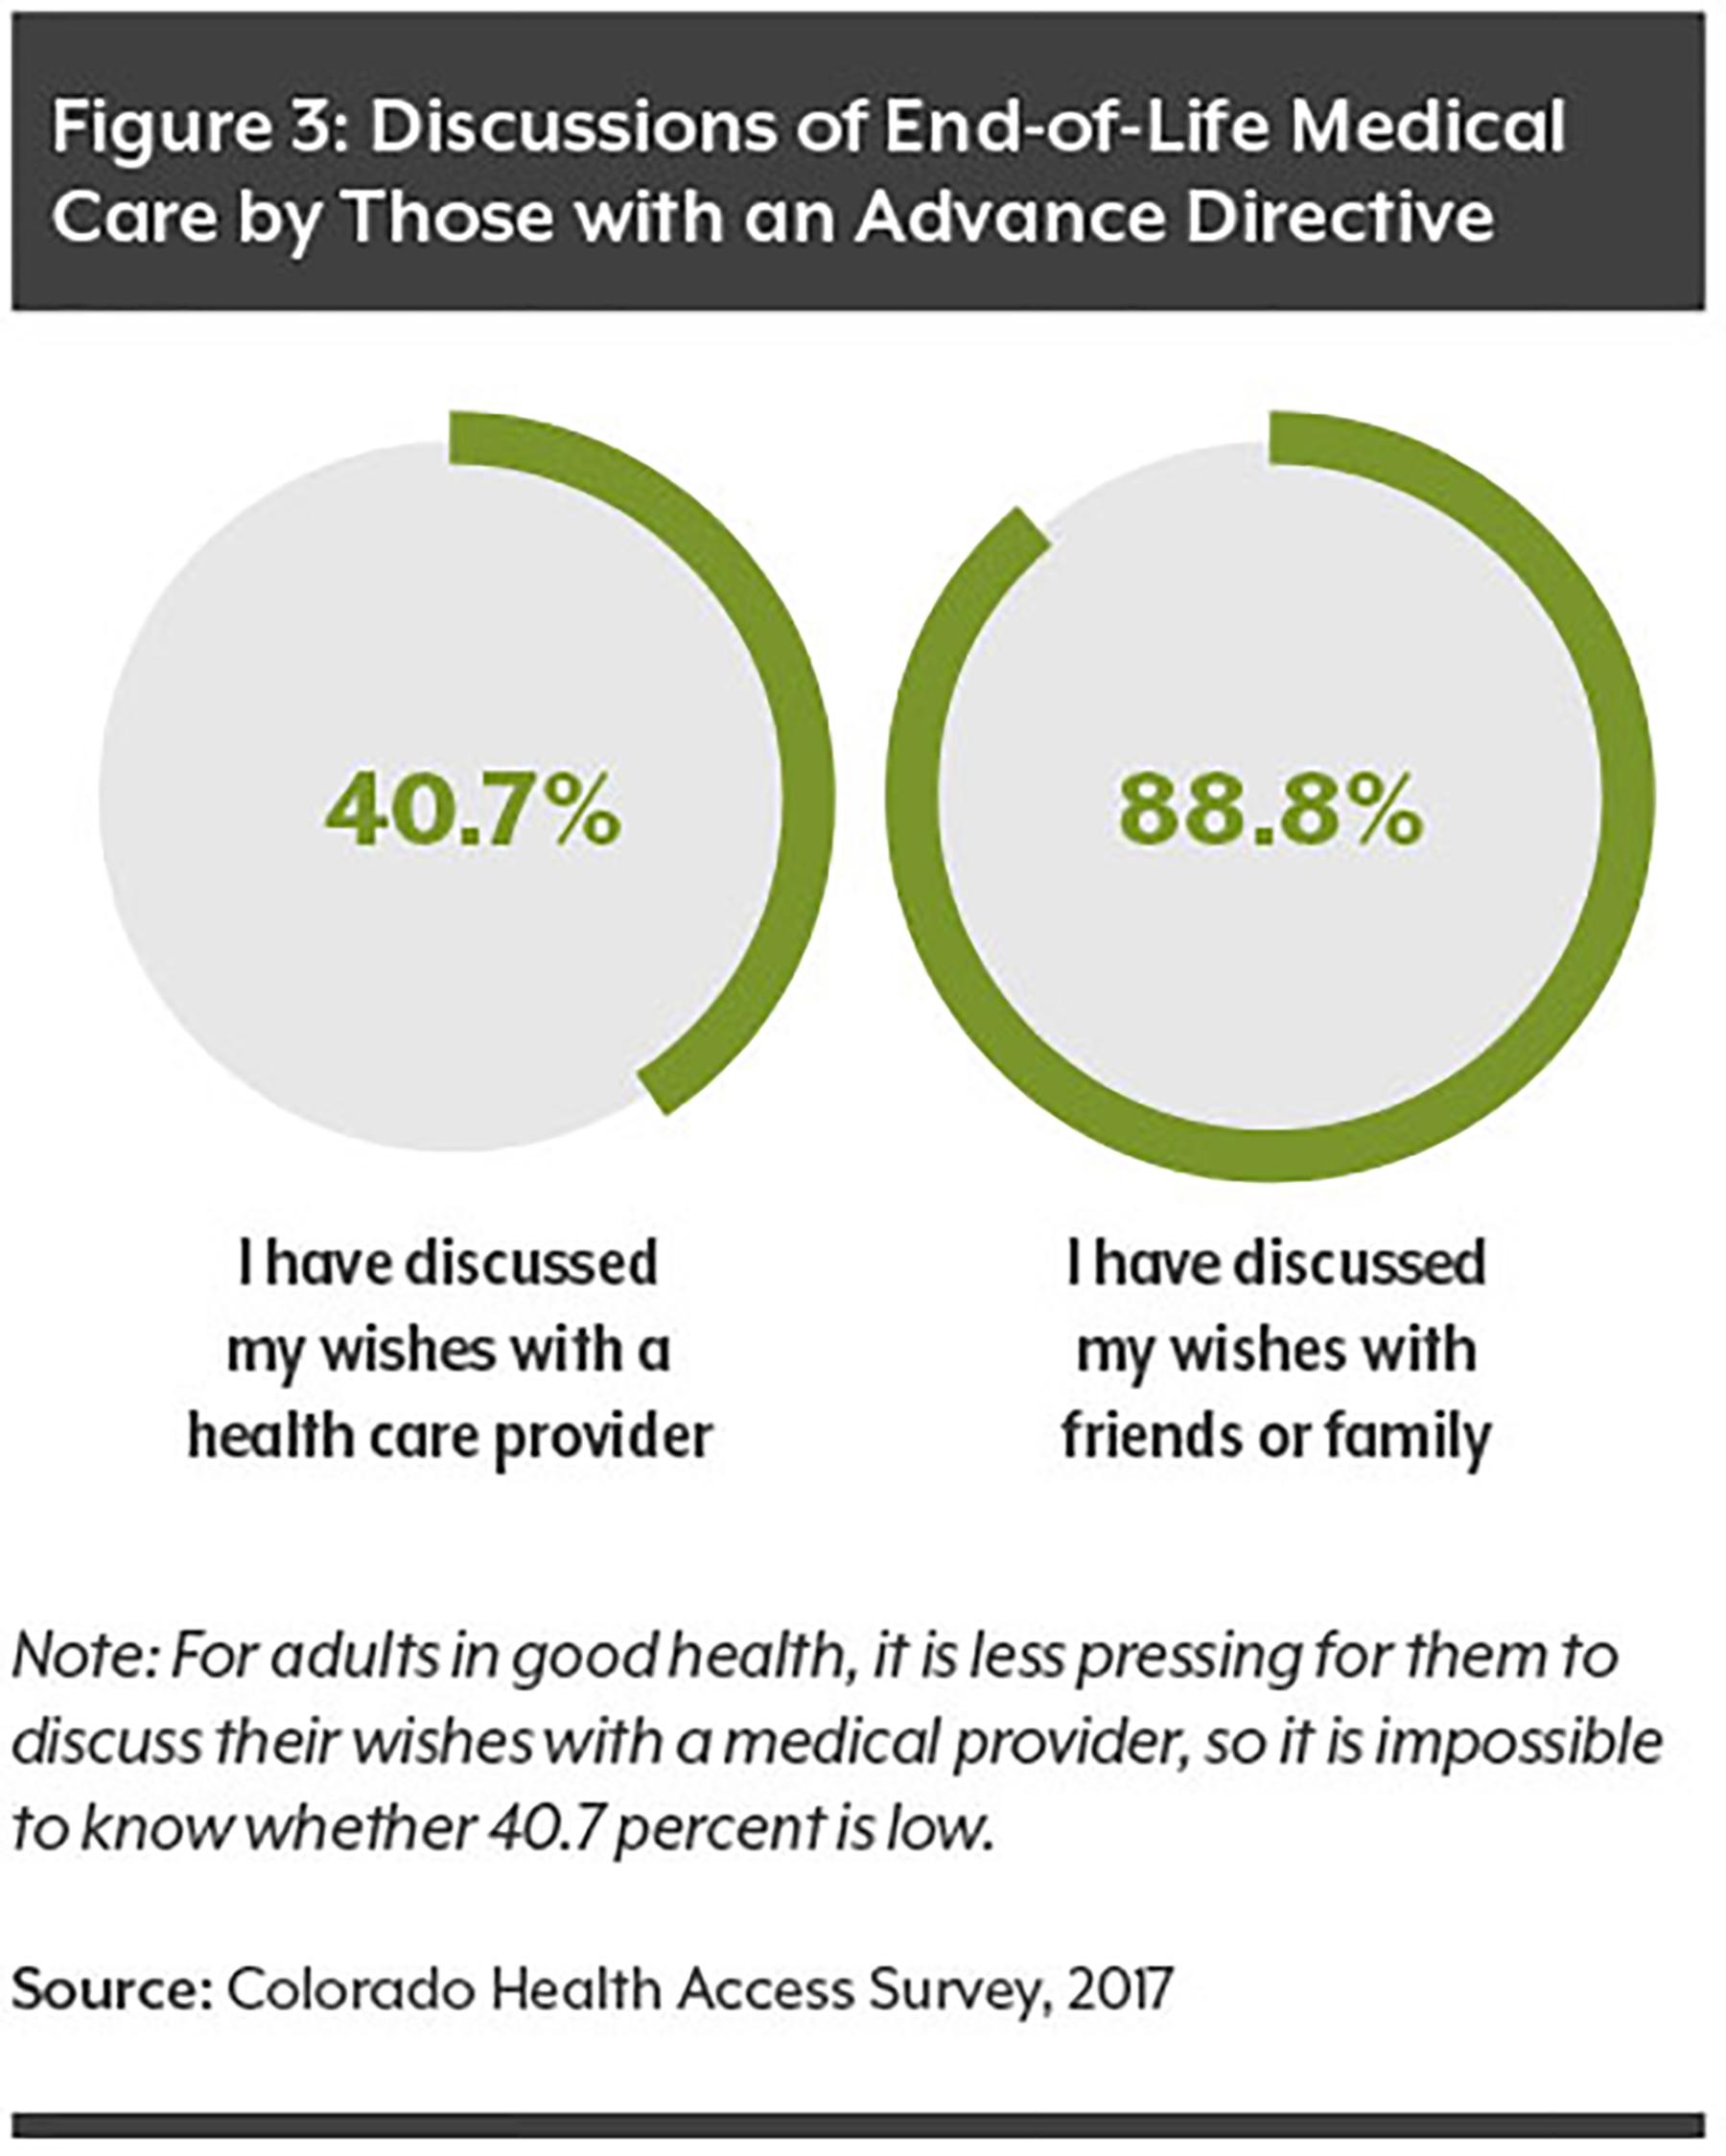 Discussions of End-of-Life Medical Care by Those With an Advance Directive